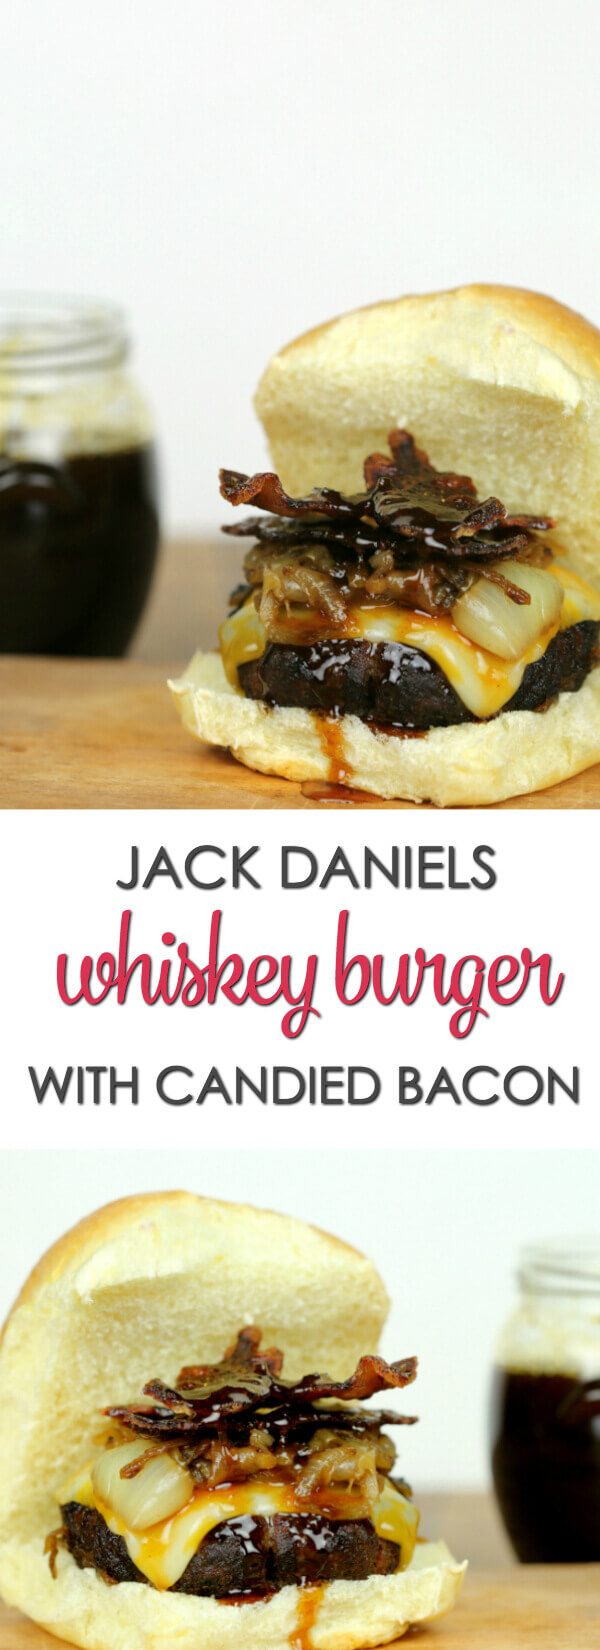 Jack Daniel's Whiskey Burger - this burger recipe is over the top with bacon and a killer Jack Daniels whiskey sauce 